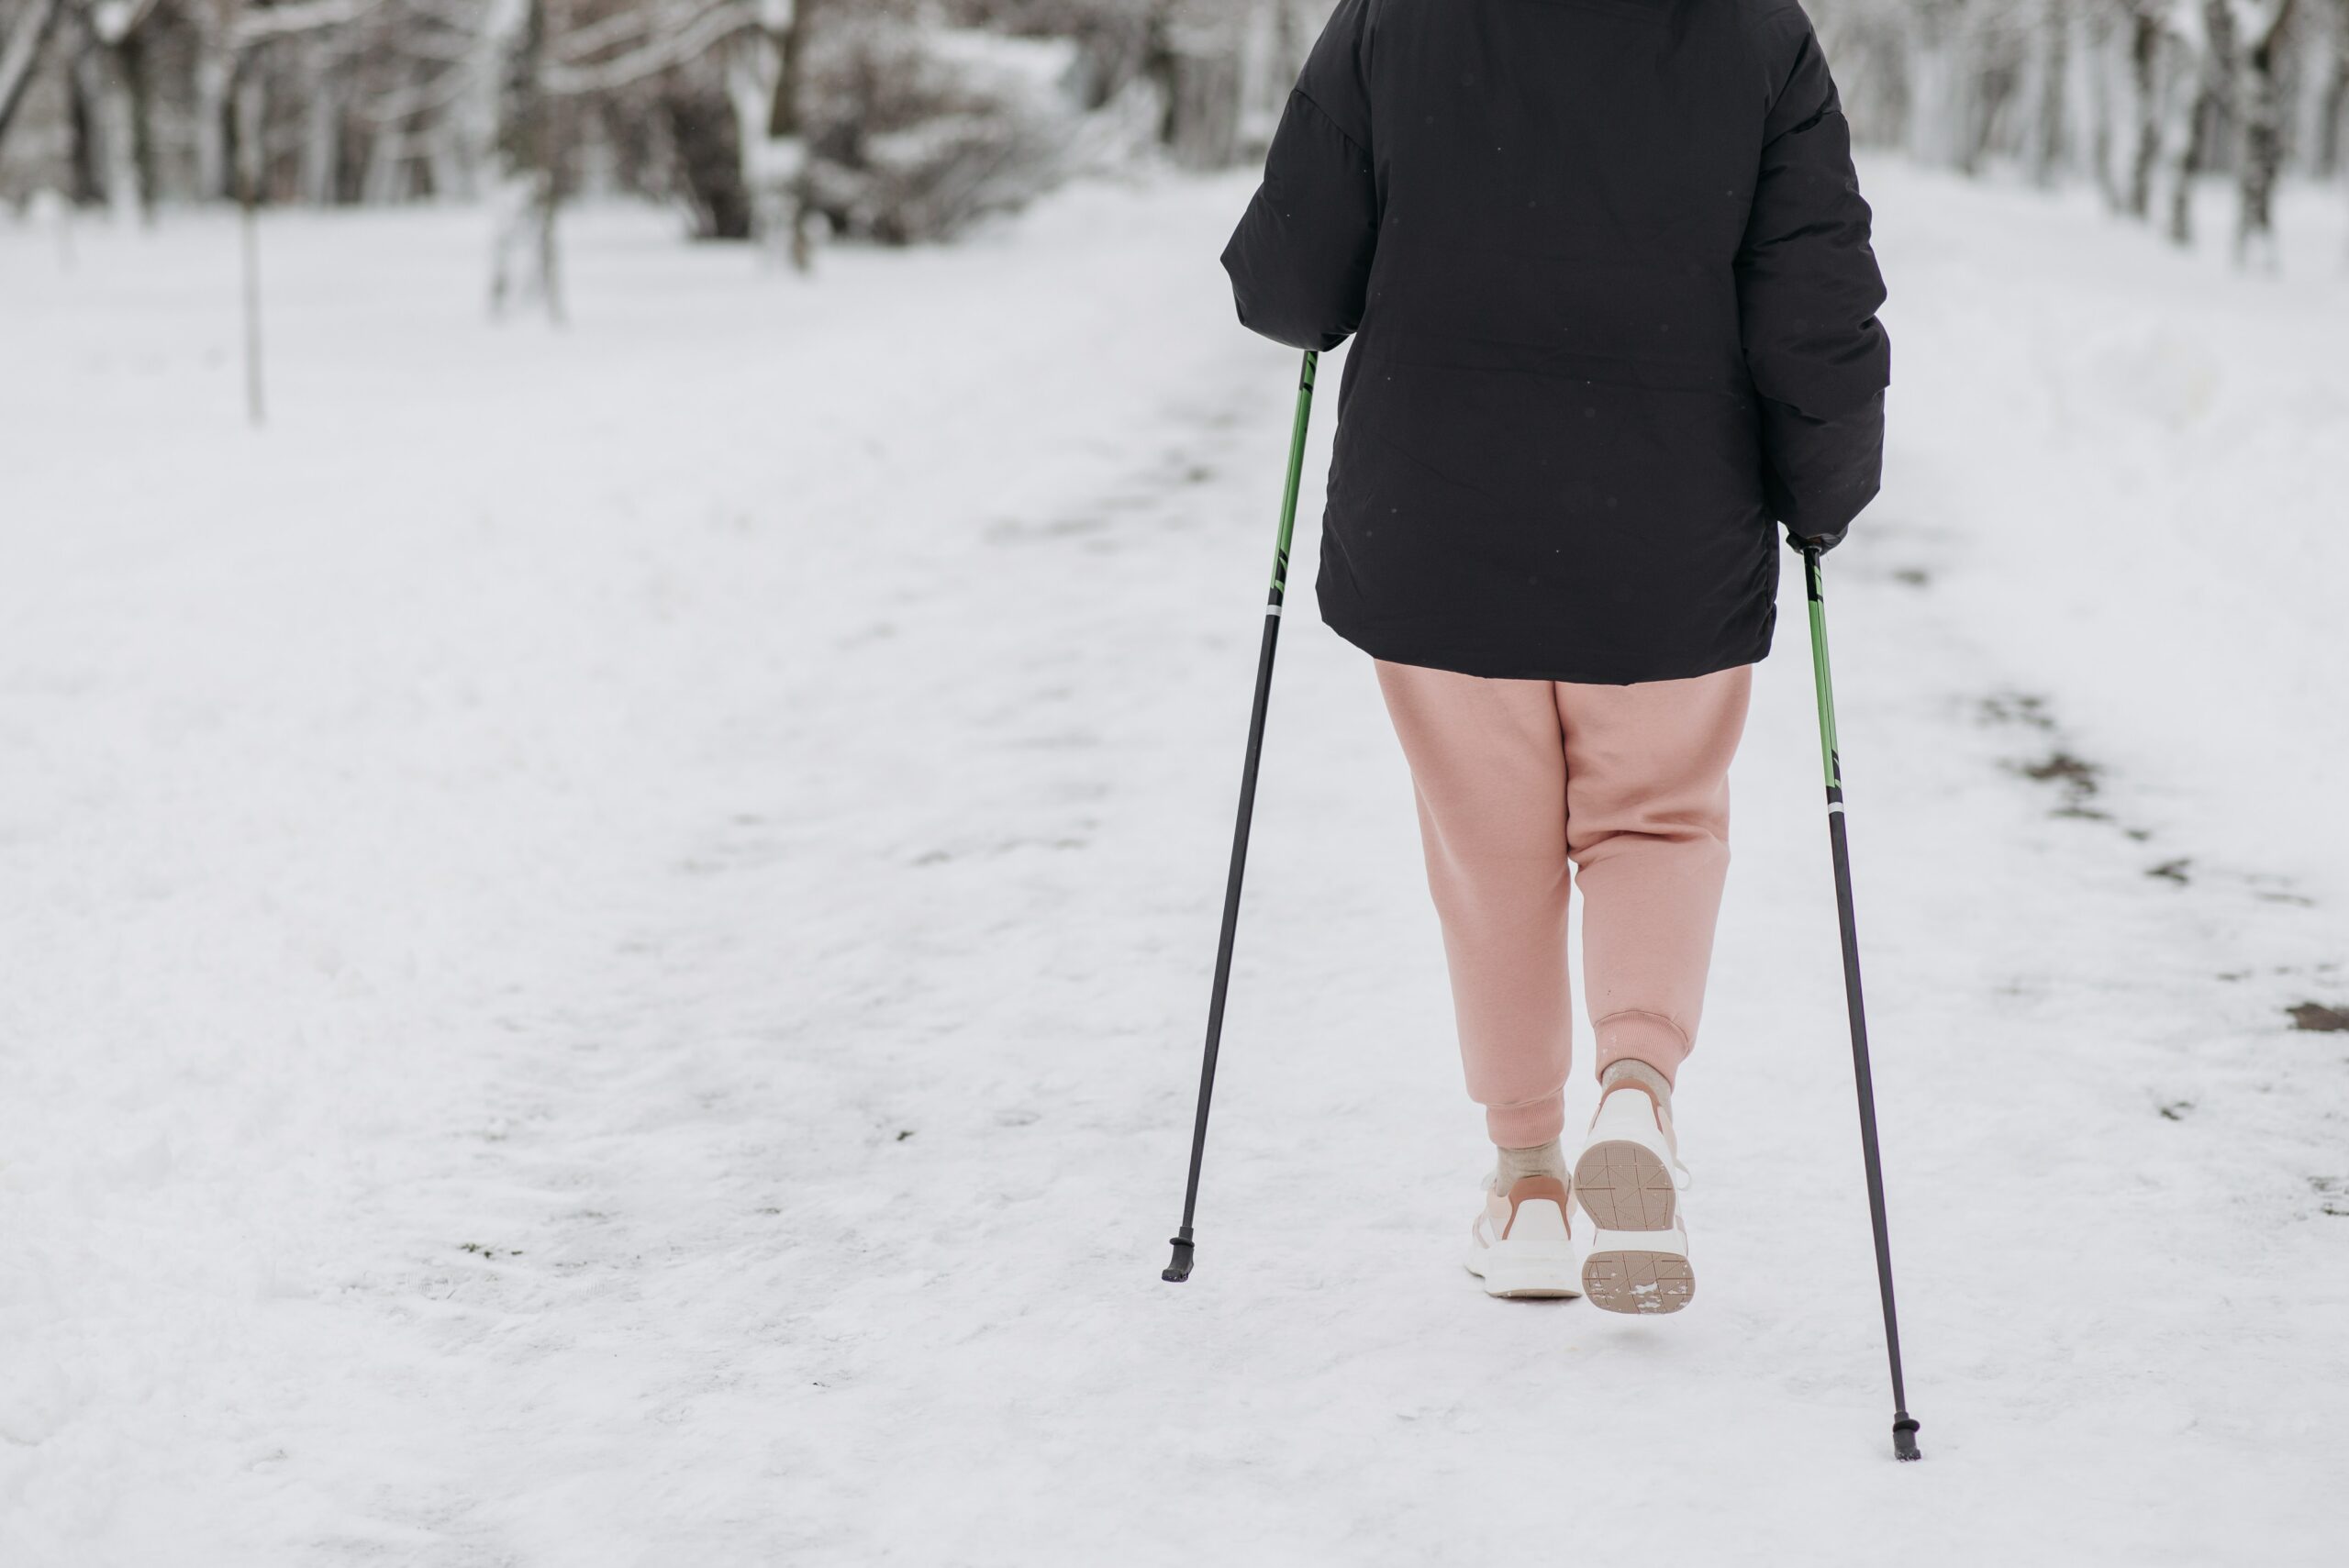 Nordic Pole Walking For Seniors: What Is It and Is It Good For You?